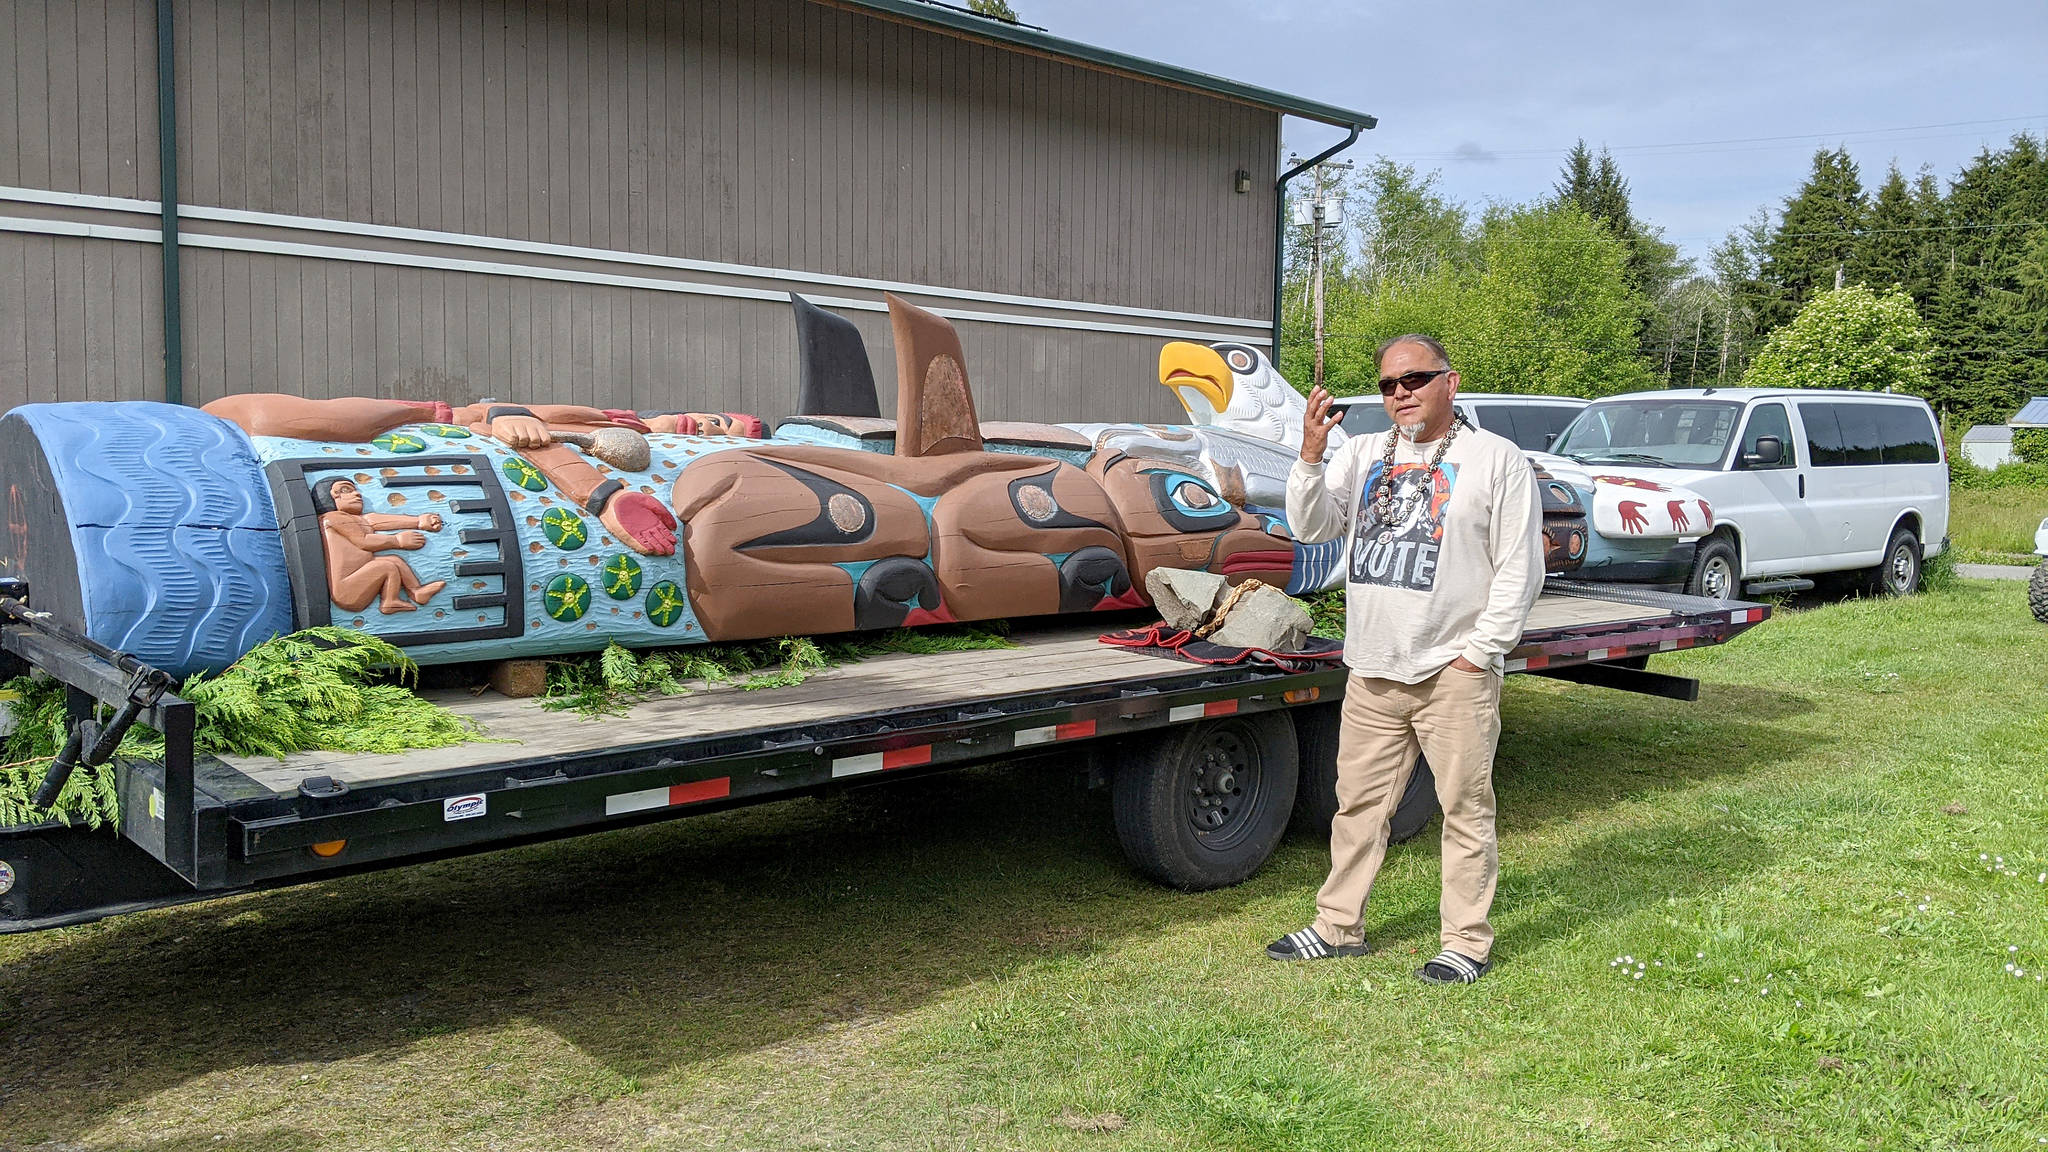 Photo provided by Ruben Estavillo
Lummi Nation citizen and Northwest tour organizer Freddie Sul ka dub Lane, explains the different aspects of the totem pole during a stop in Queets on Wednesday afternoon.